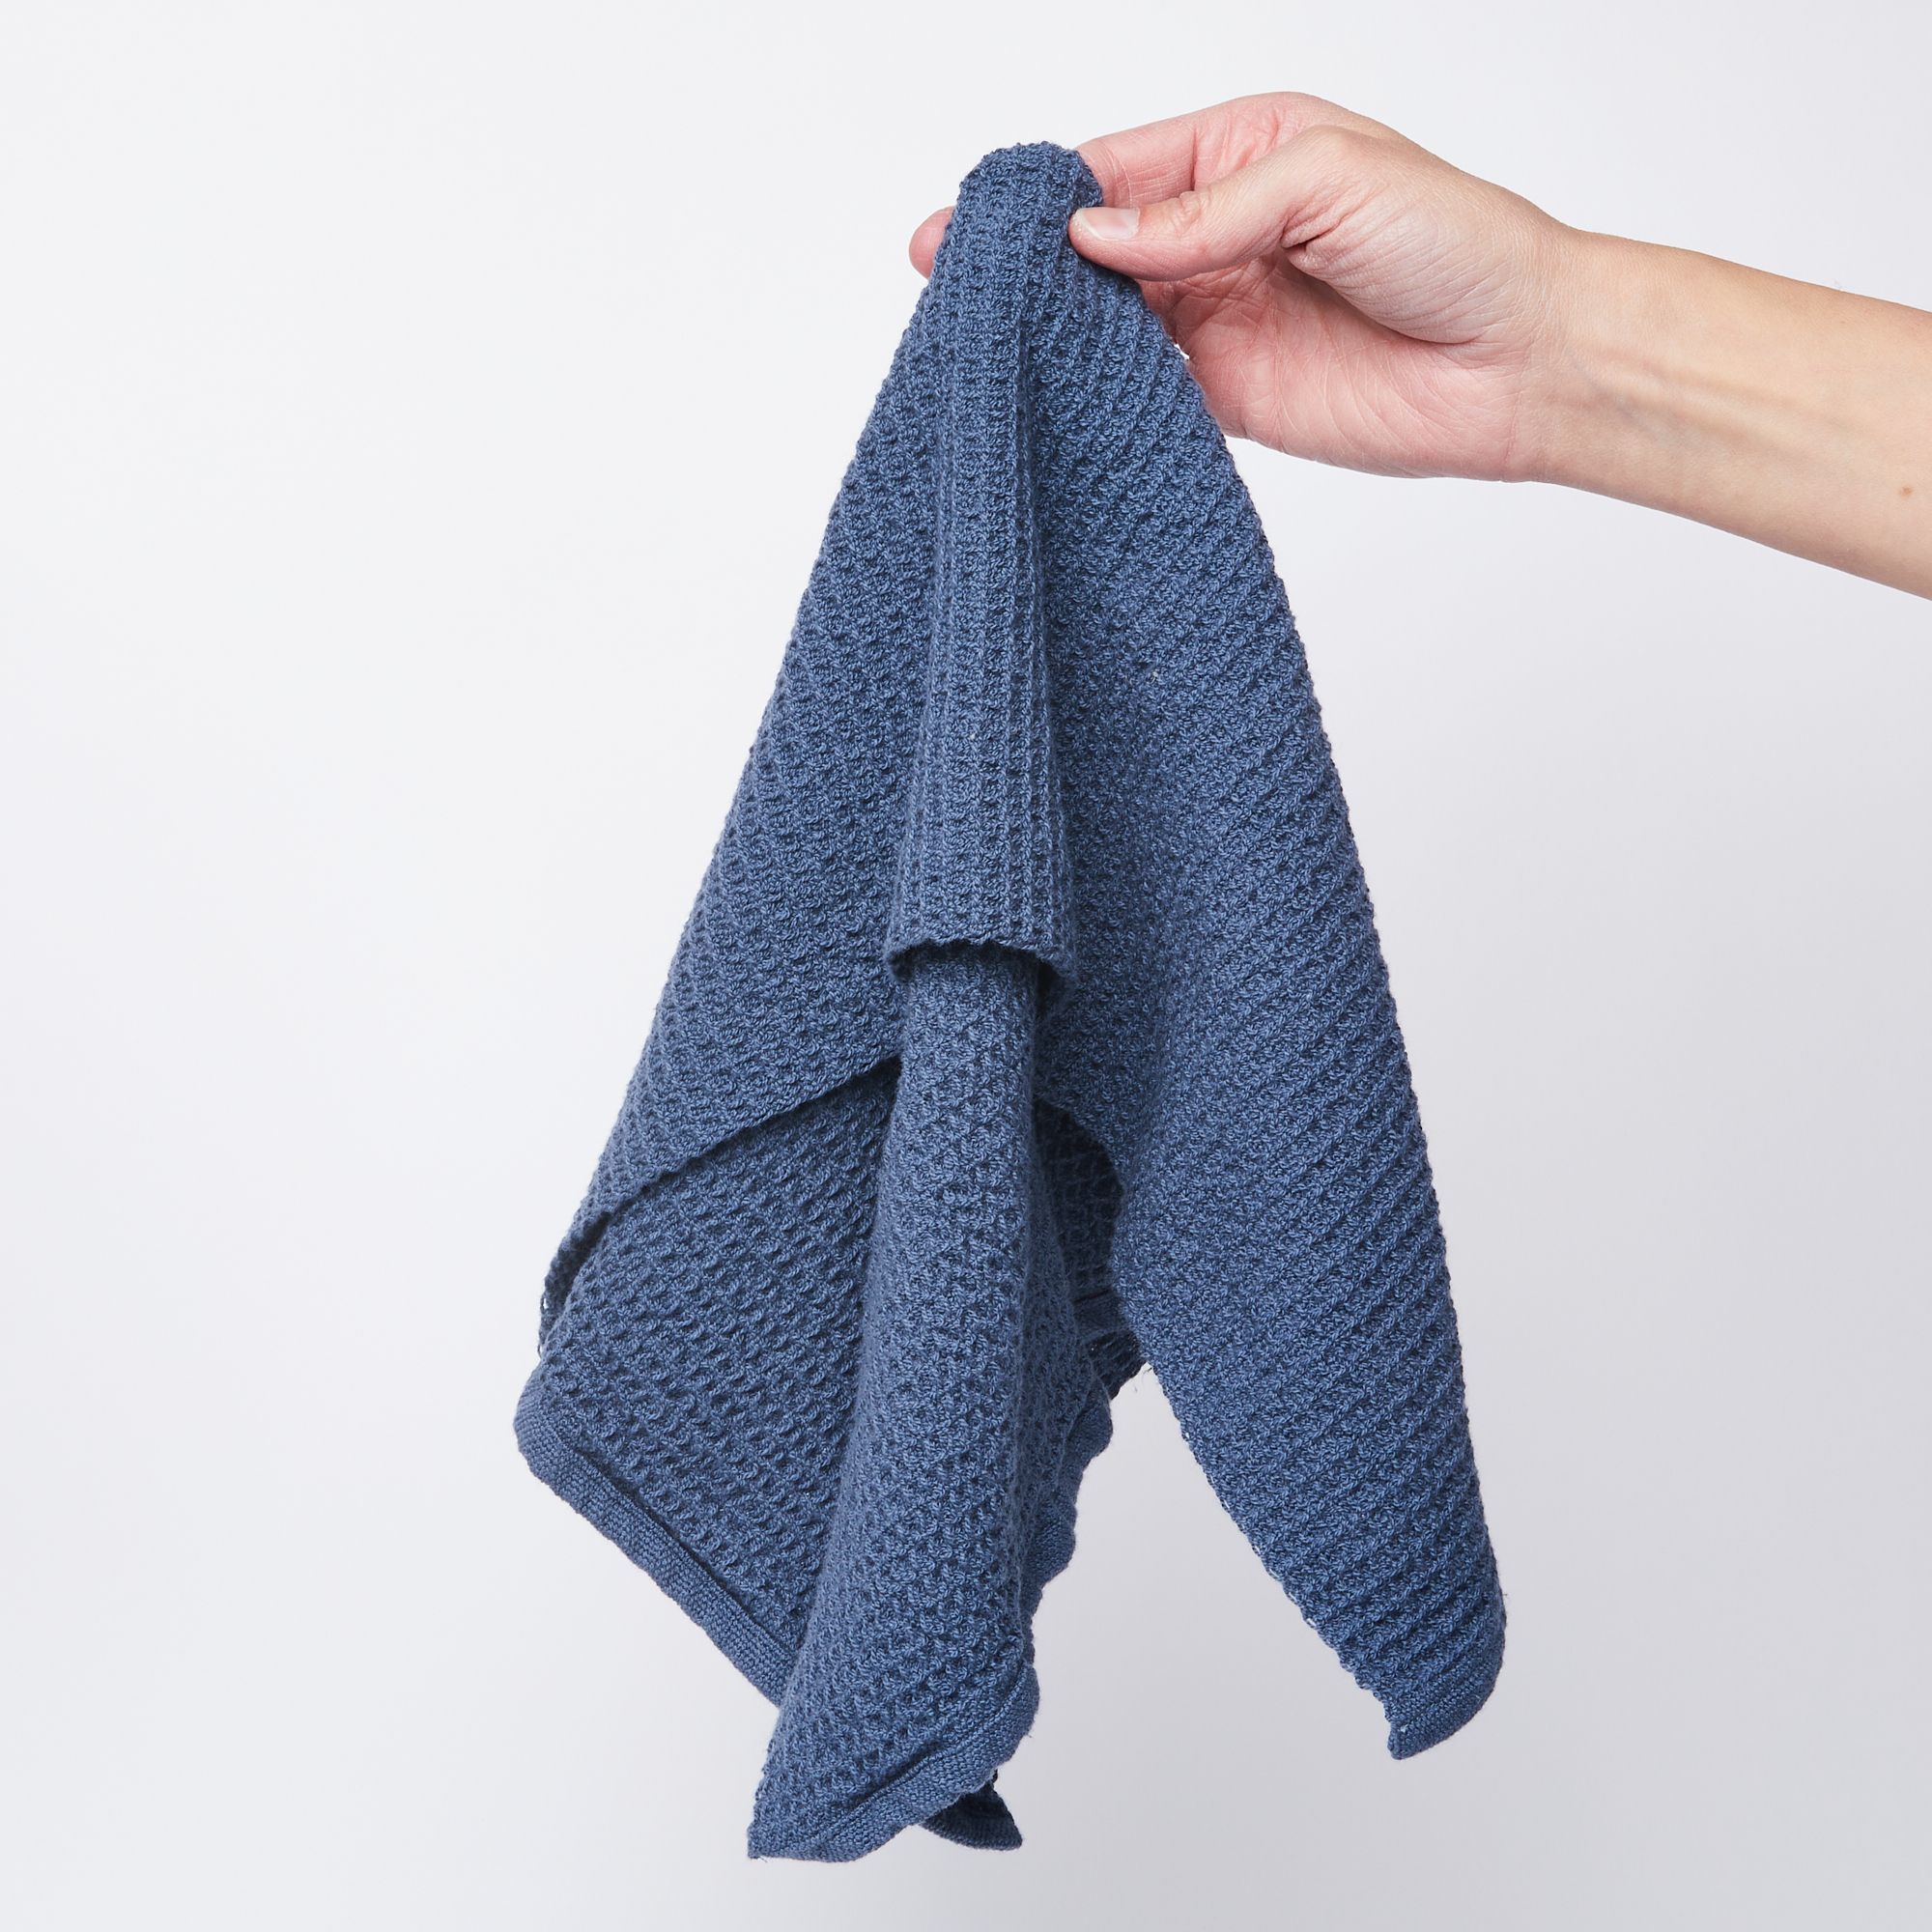 Hand holding a blue waffle weave kitchen towel